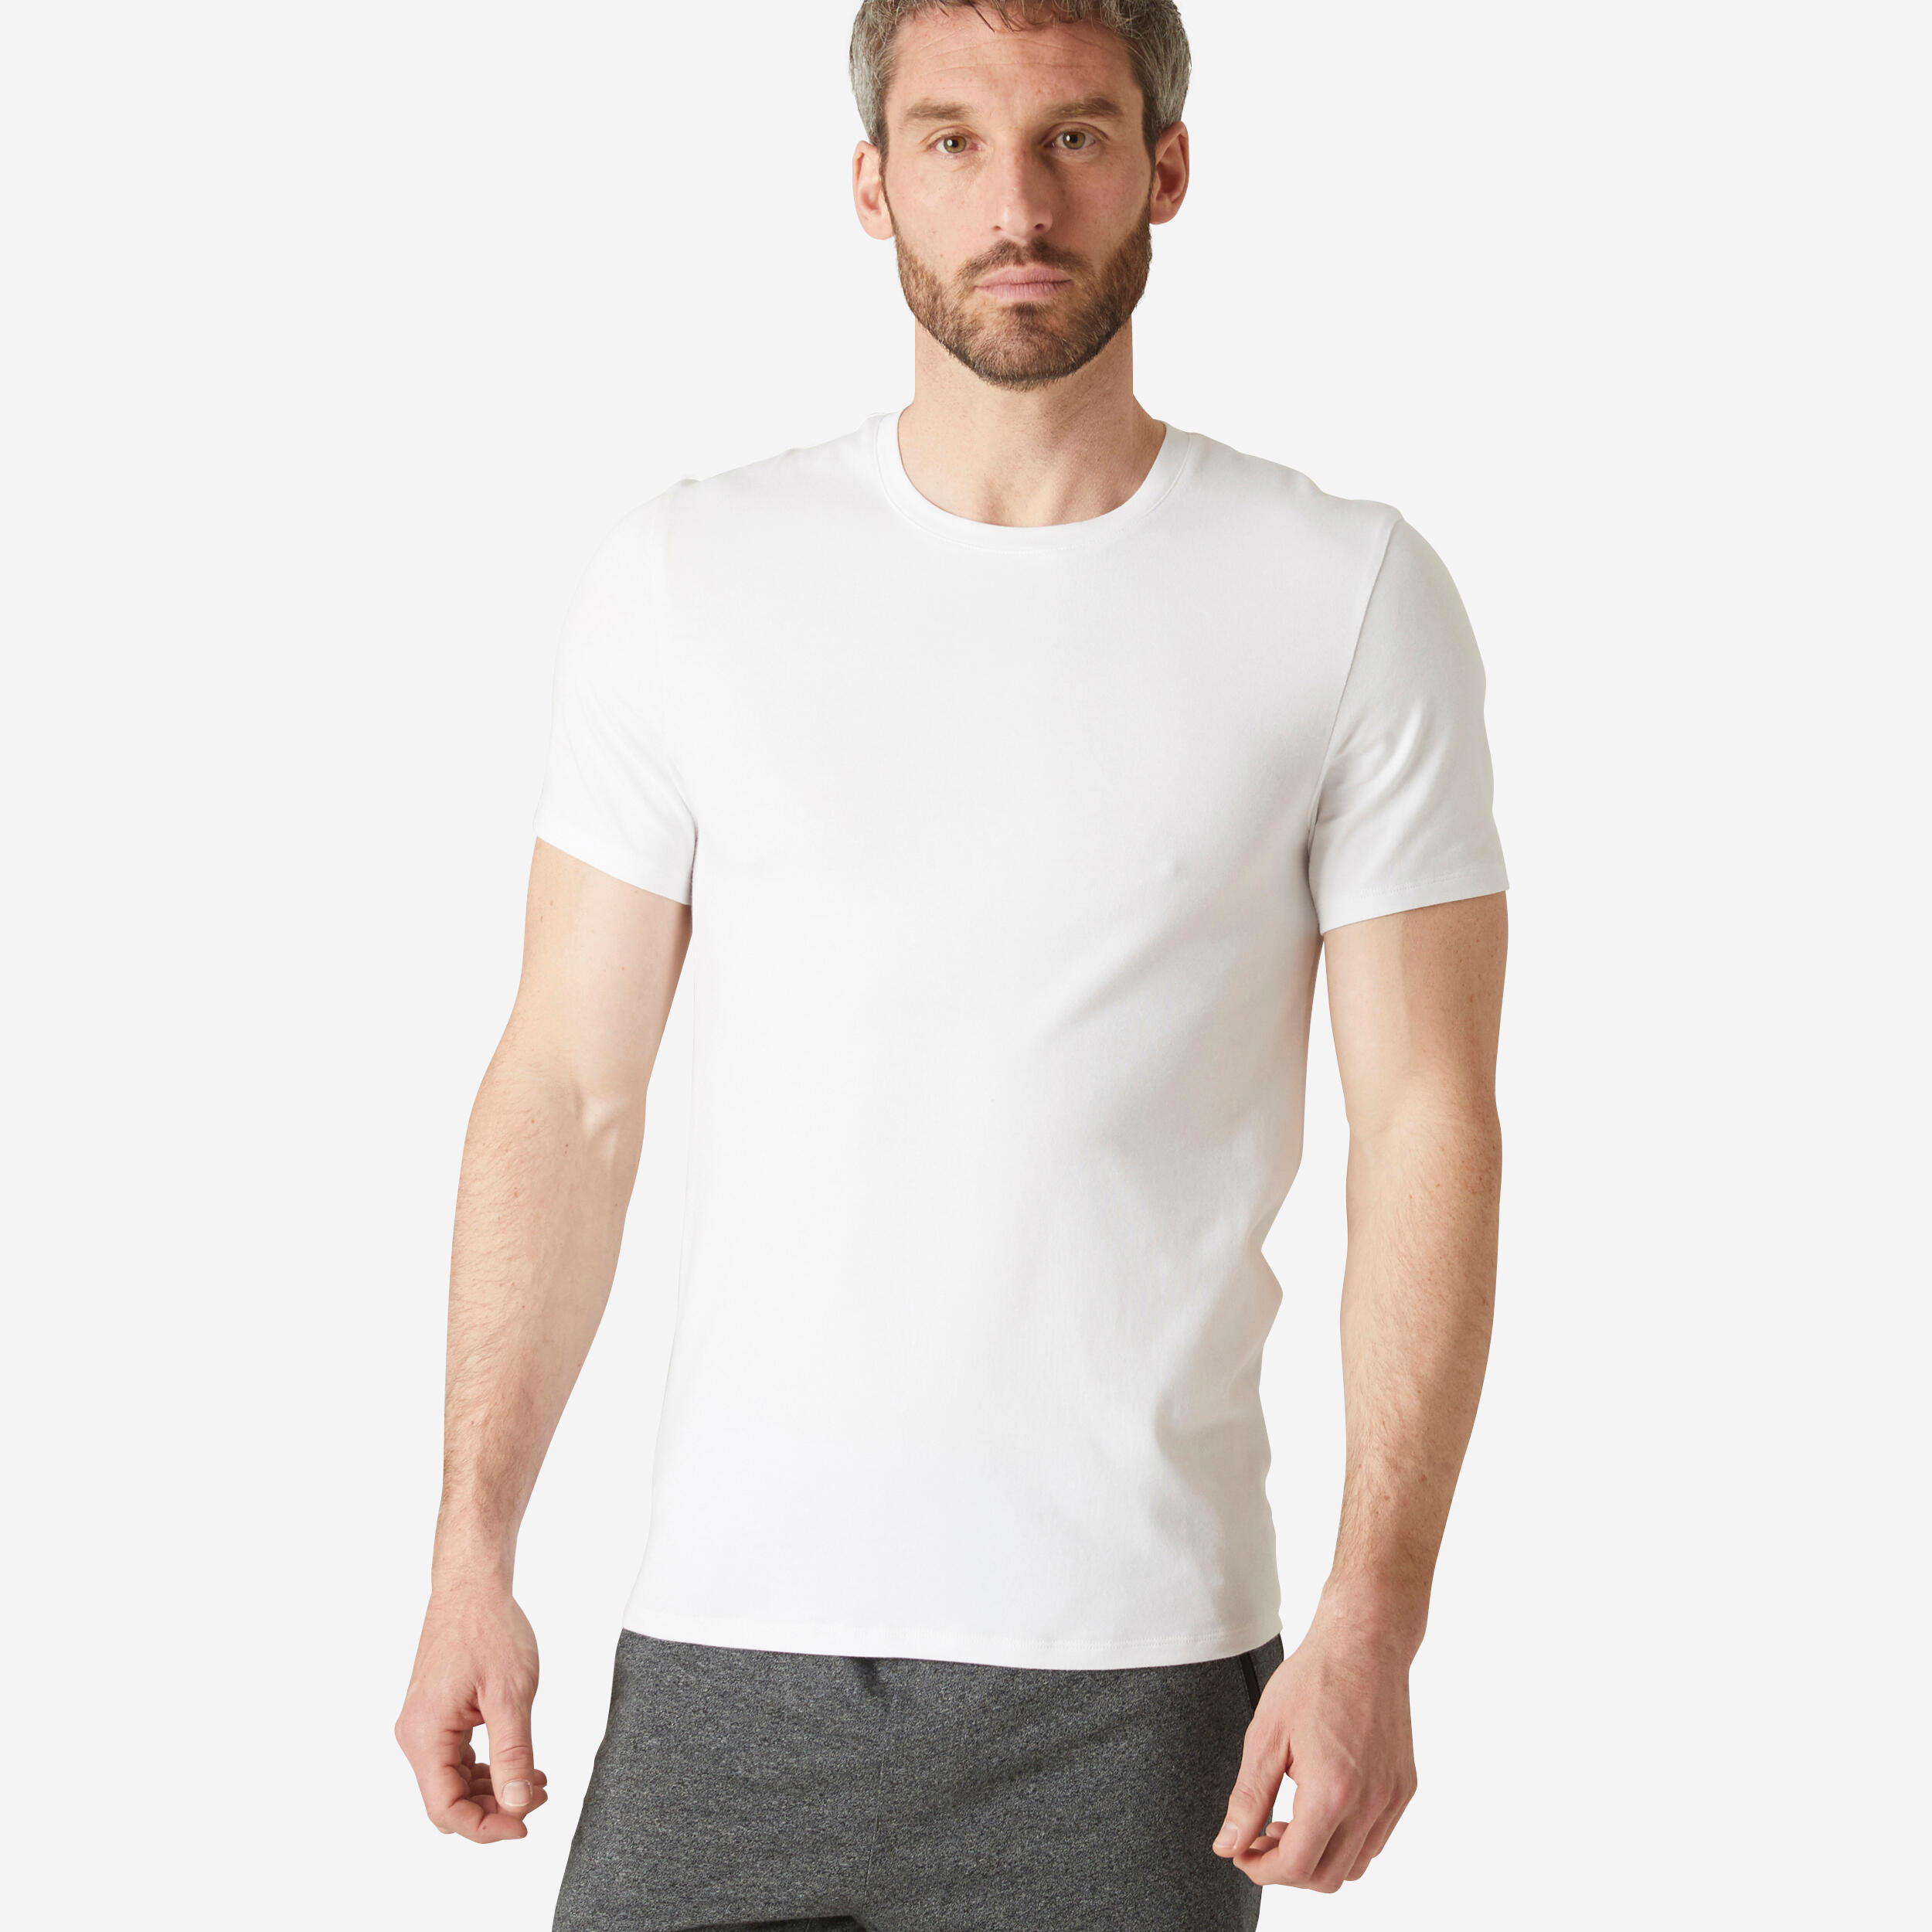 Second Life - Men's Slim-fit Fitness T-shirt 500 - Ice White - Very Good